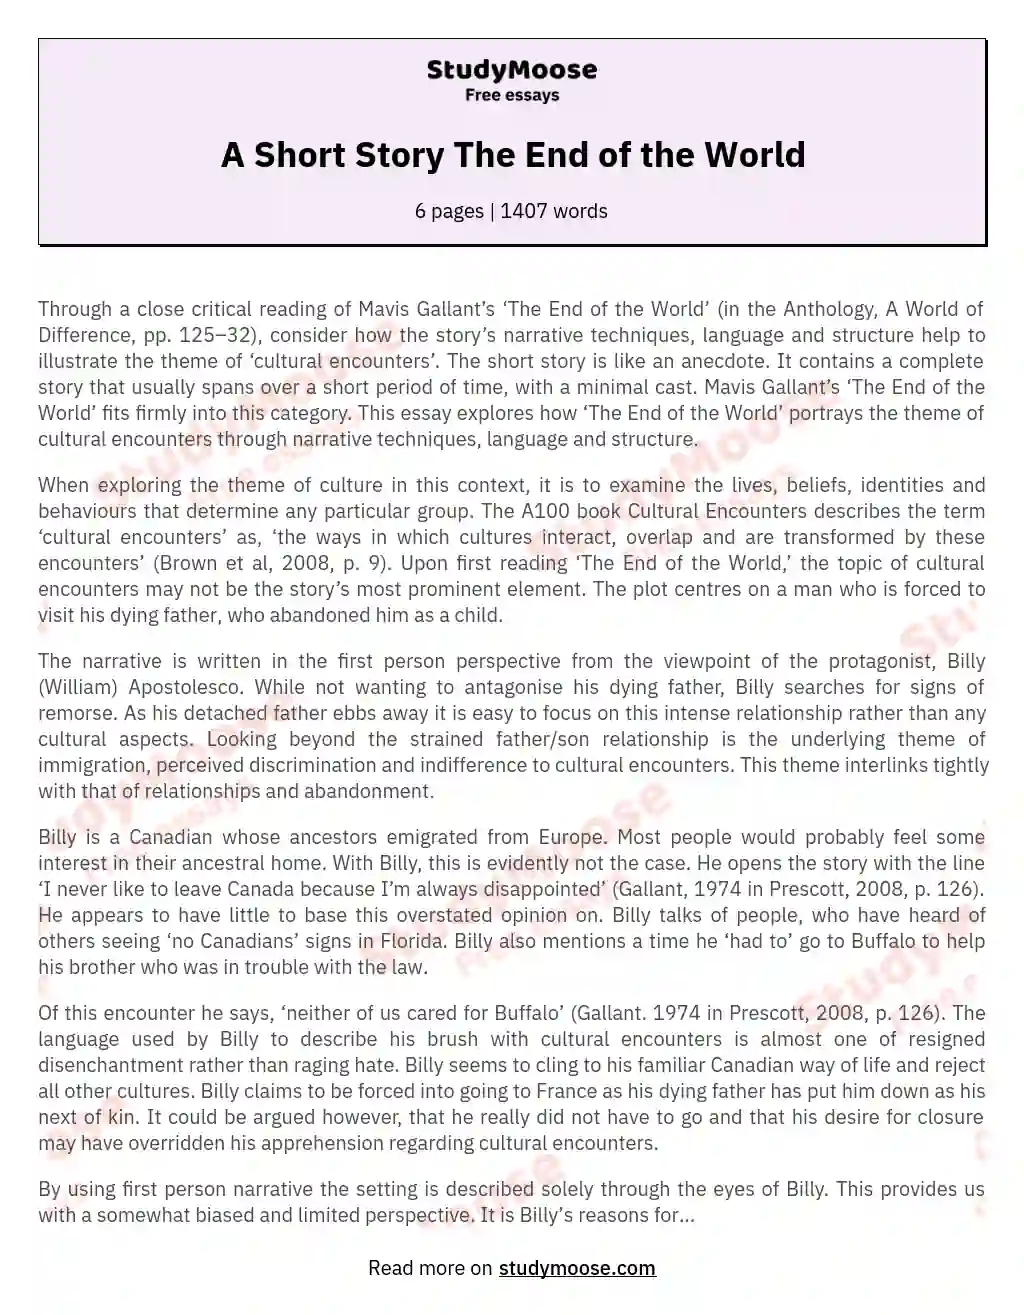 A Short Story The End of the World essay